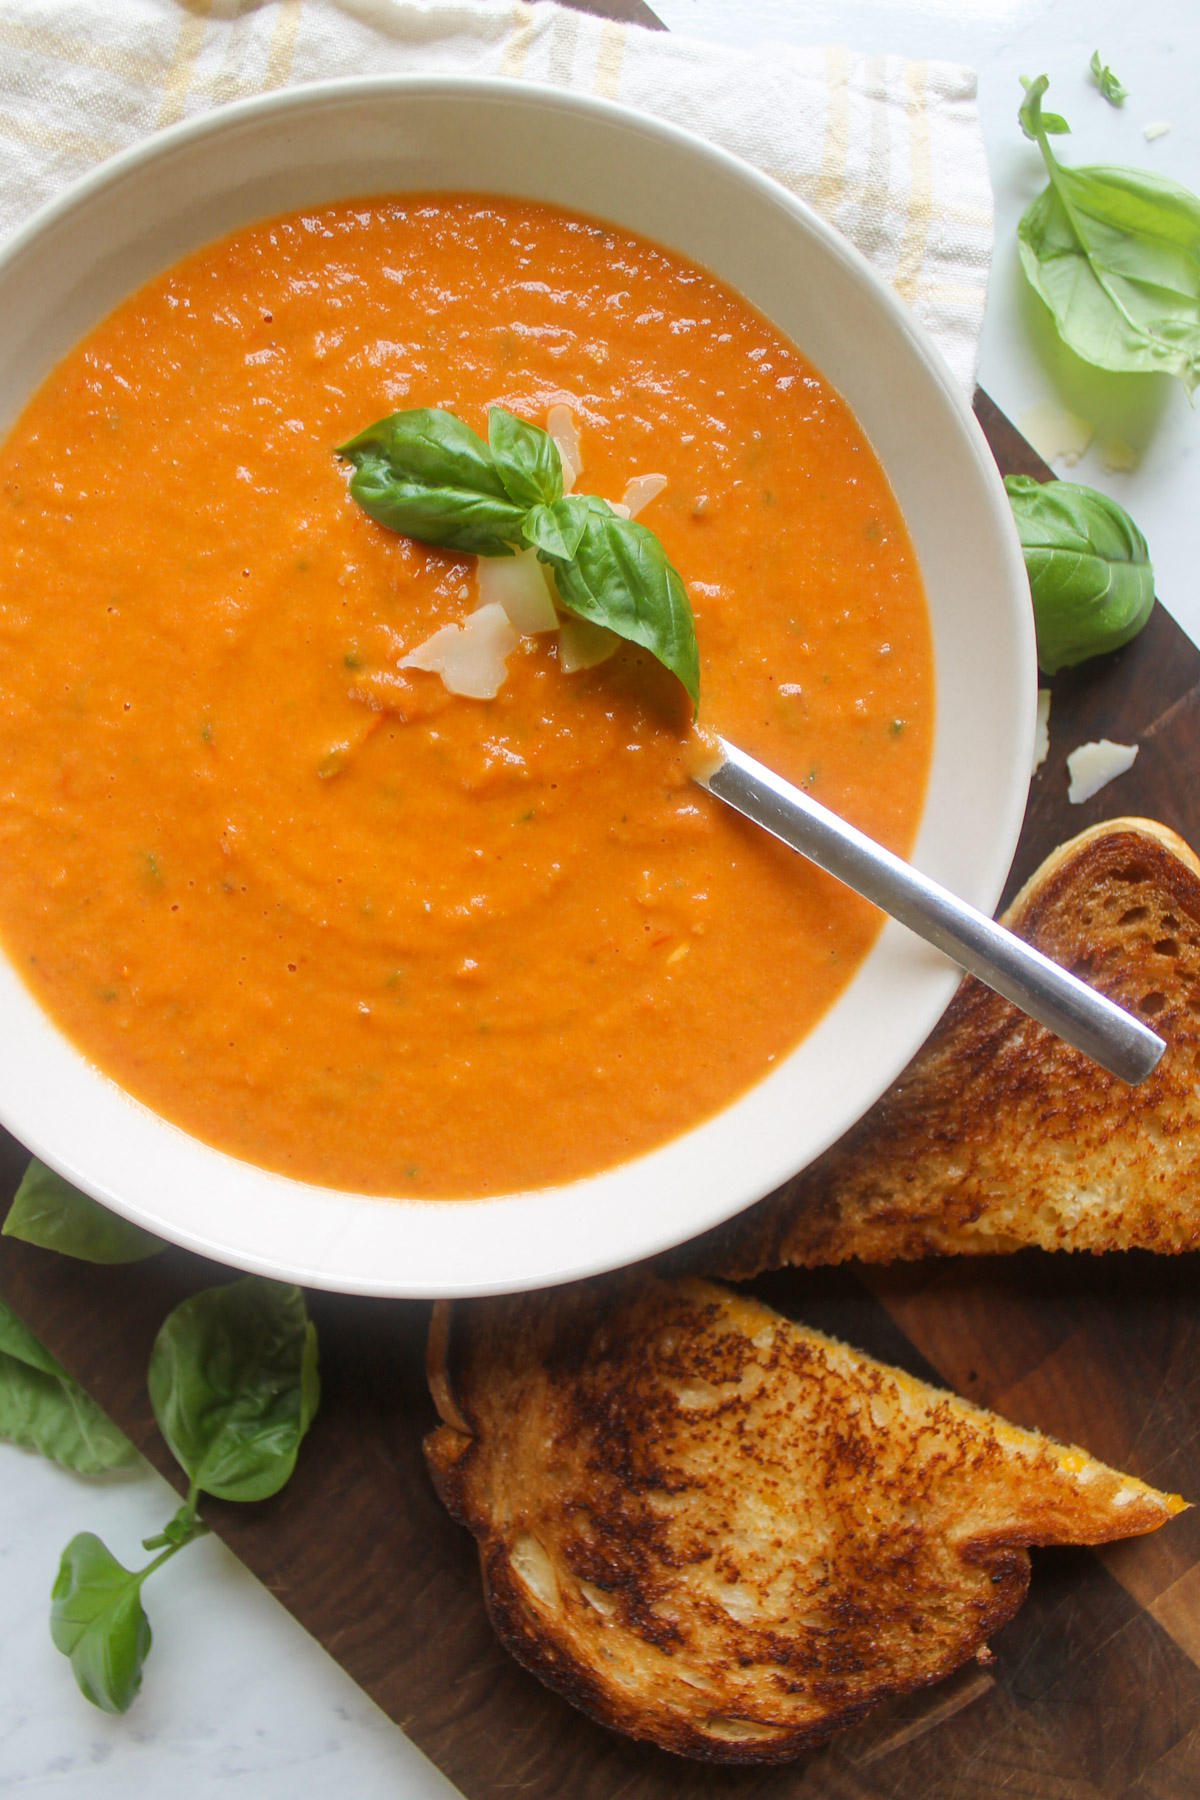 A bowl of garden tomato soup on a dark wooden cutting board with grilled cheese triangles.